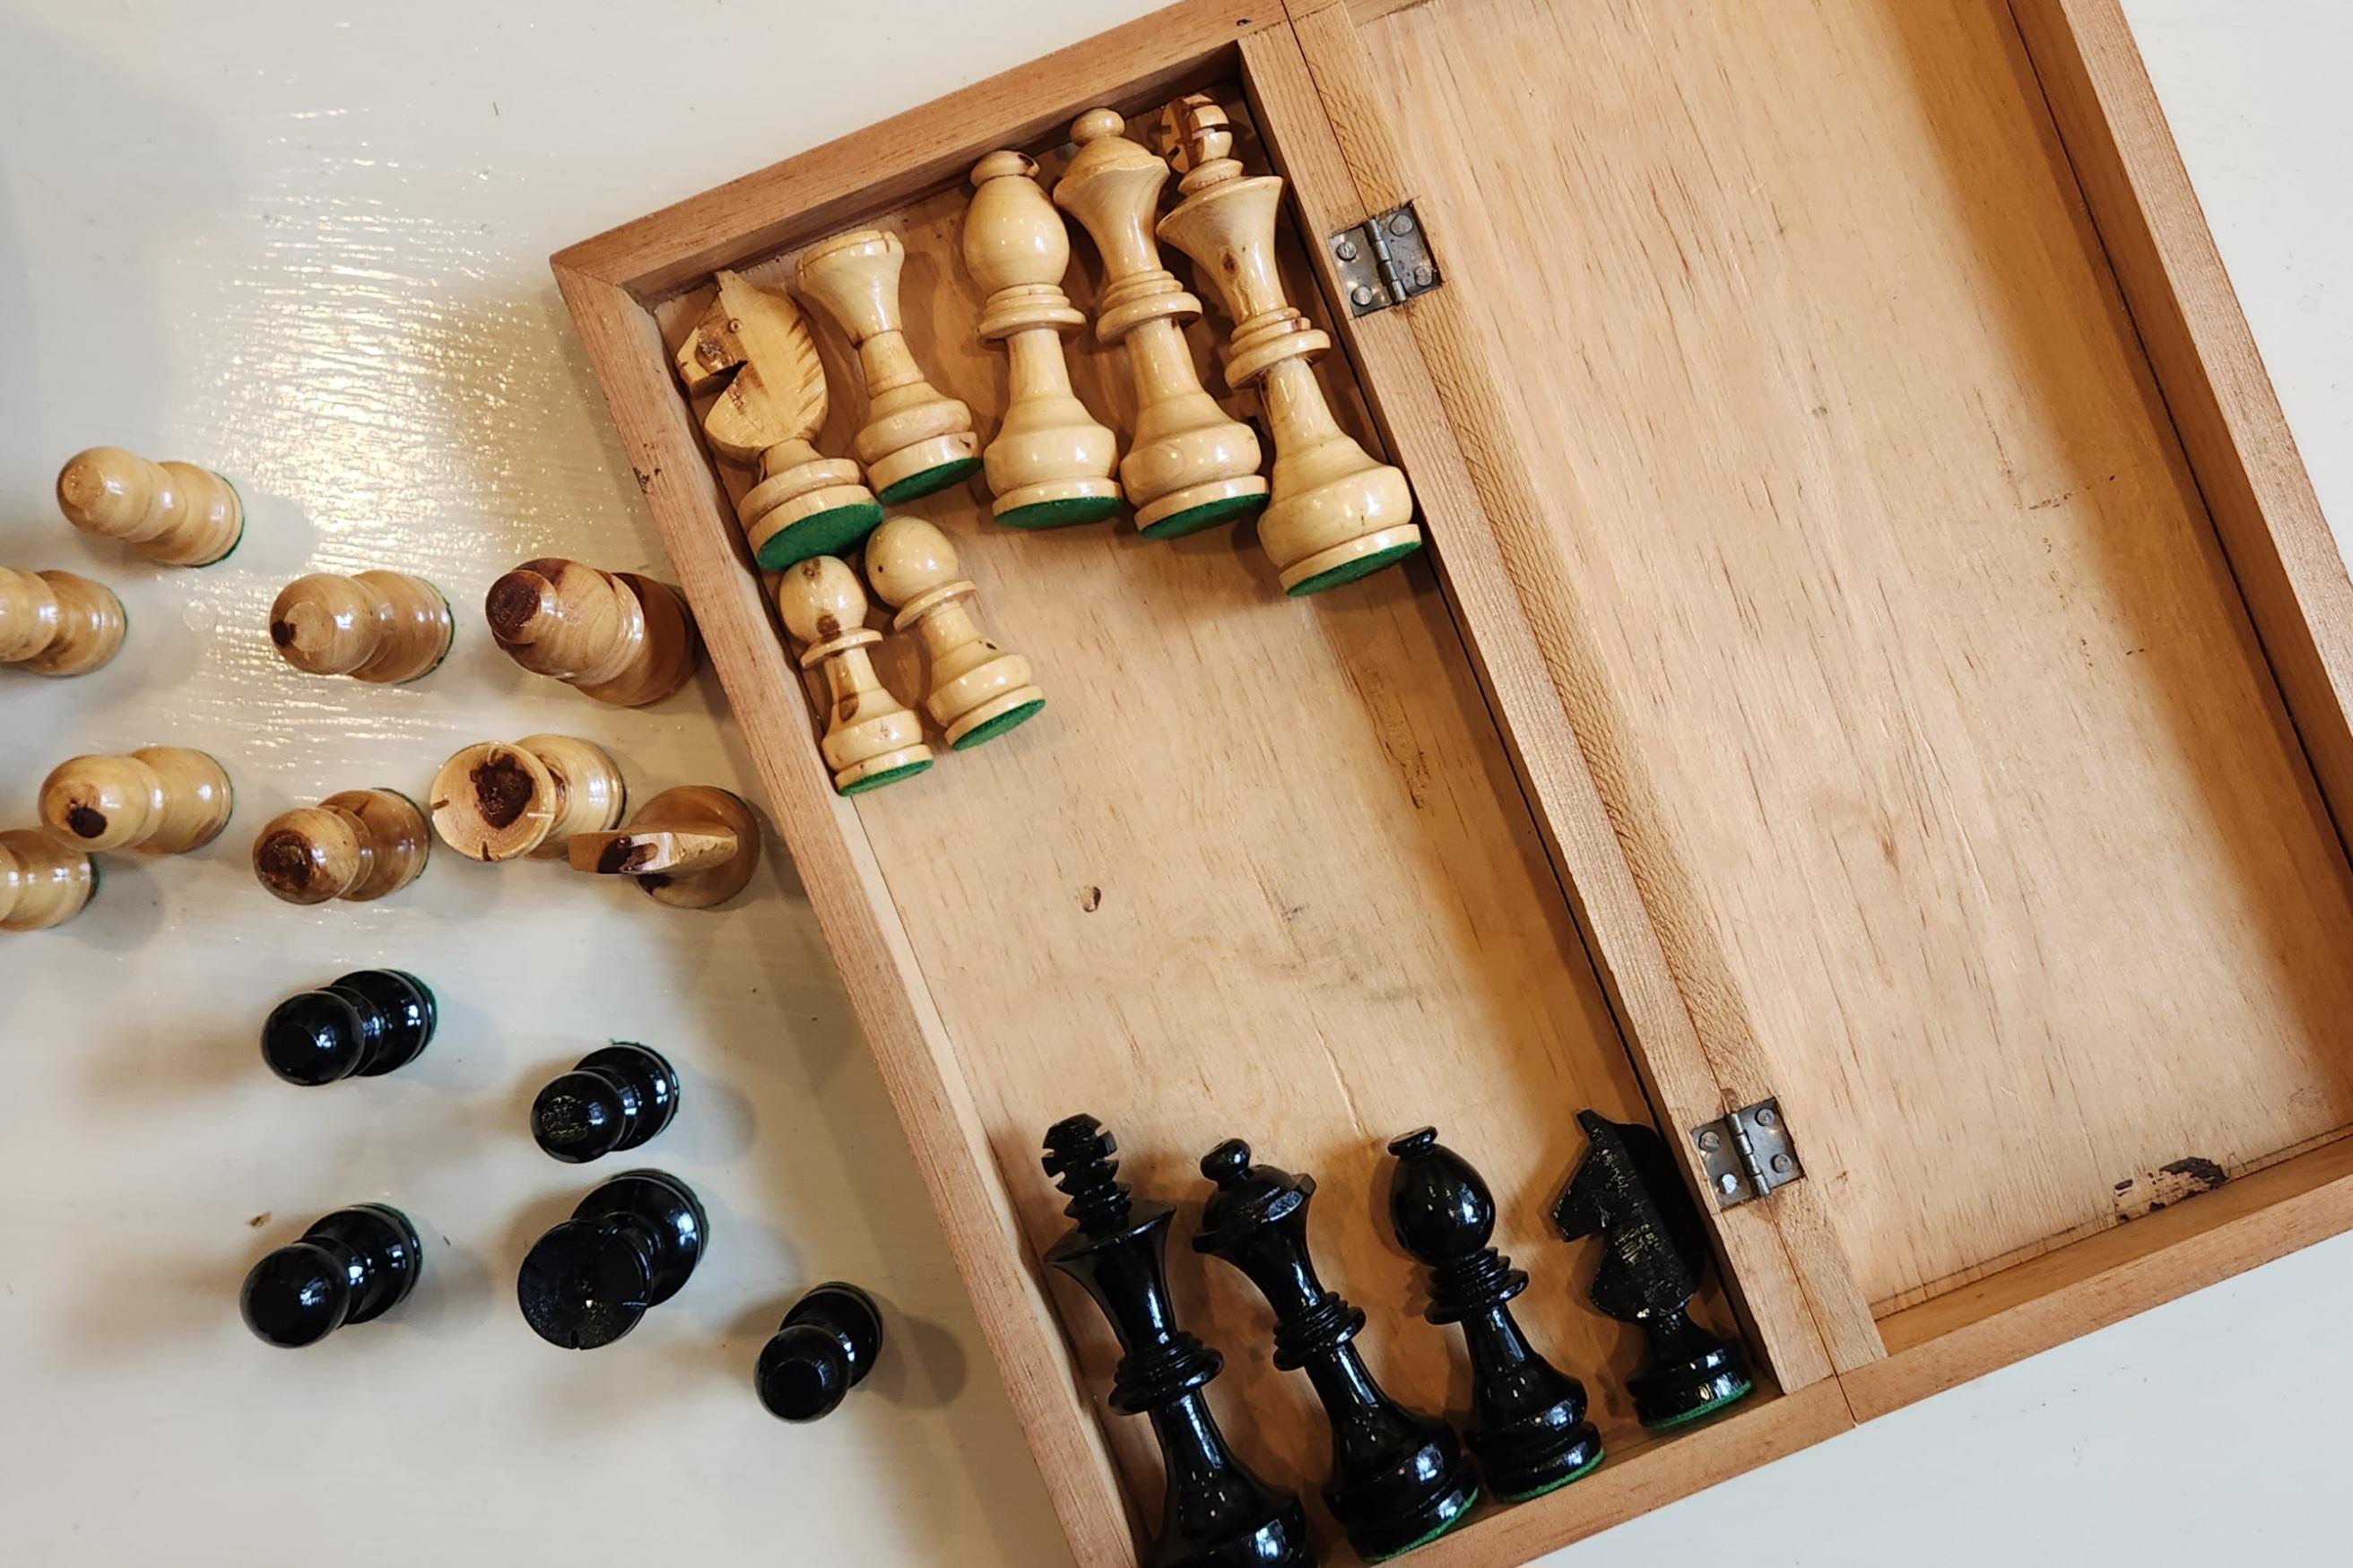 This hand carved wooden chess set from the 1960's is a wonderful display of American craftsmanship. The attention to detail of the unnamed craftsperson can be seen in each of the beautifully cared chess pieces. The board of this set can be folded